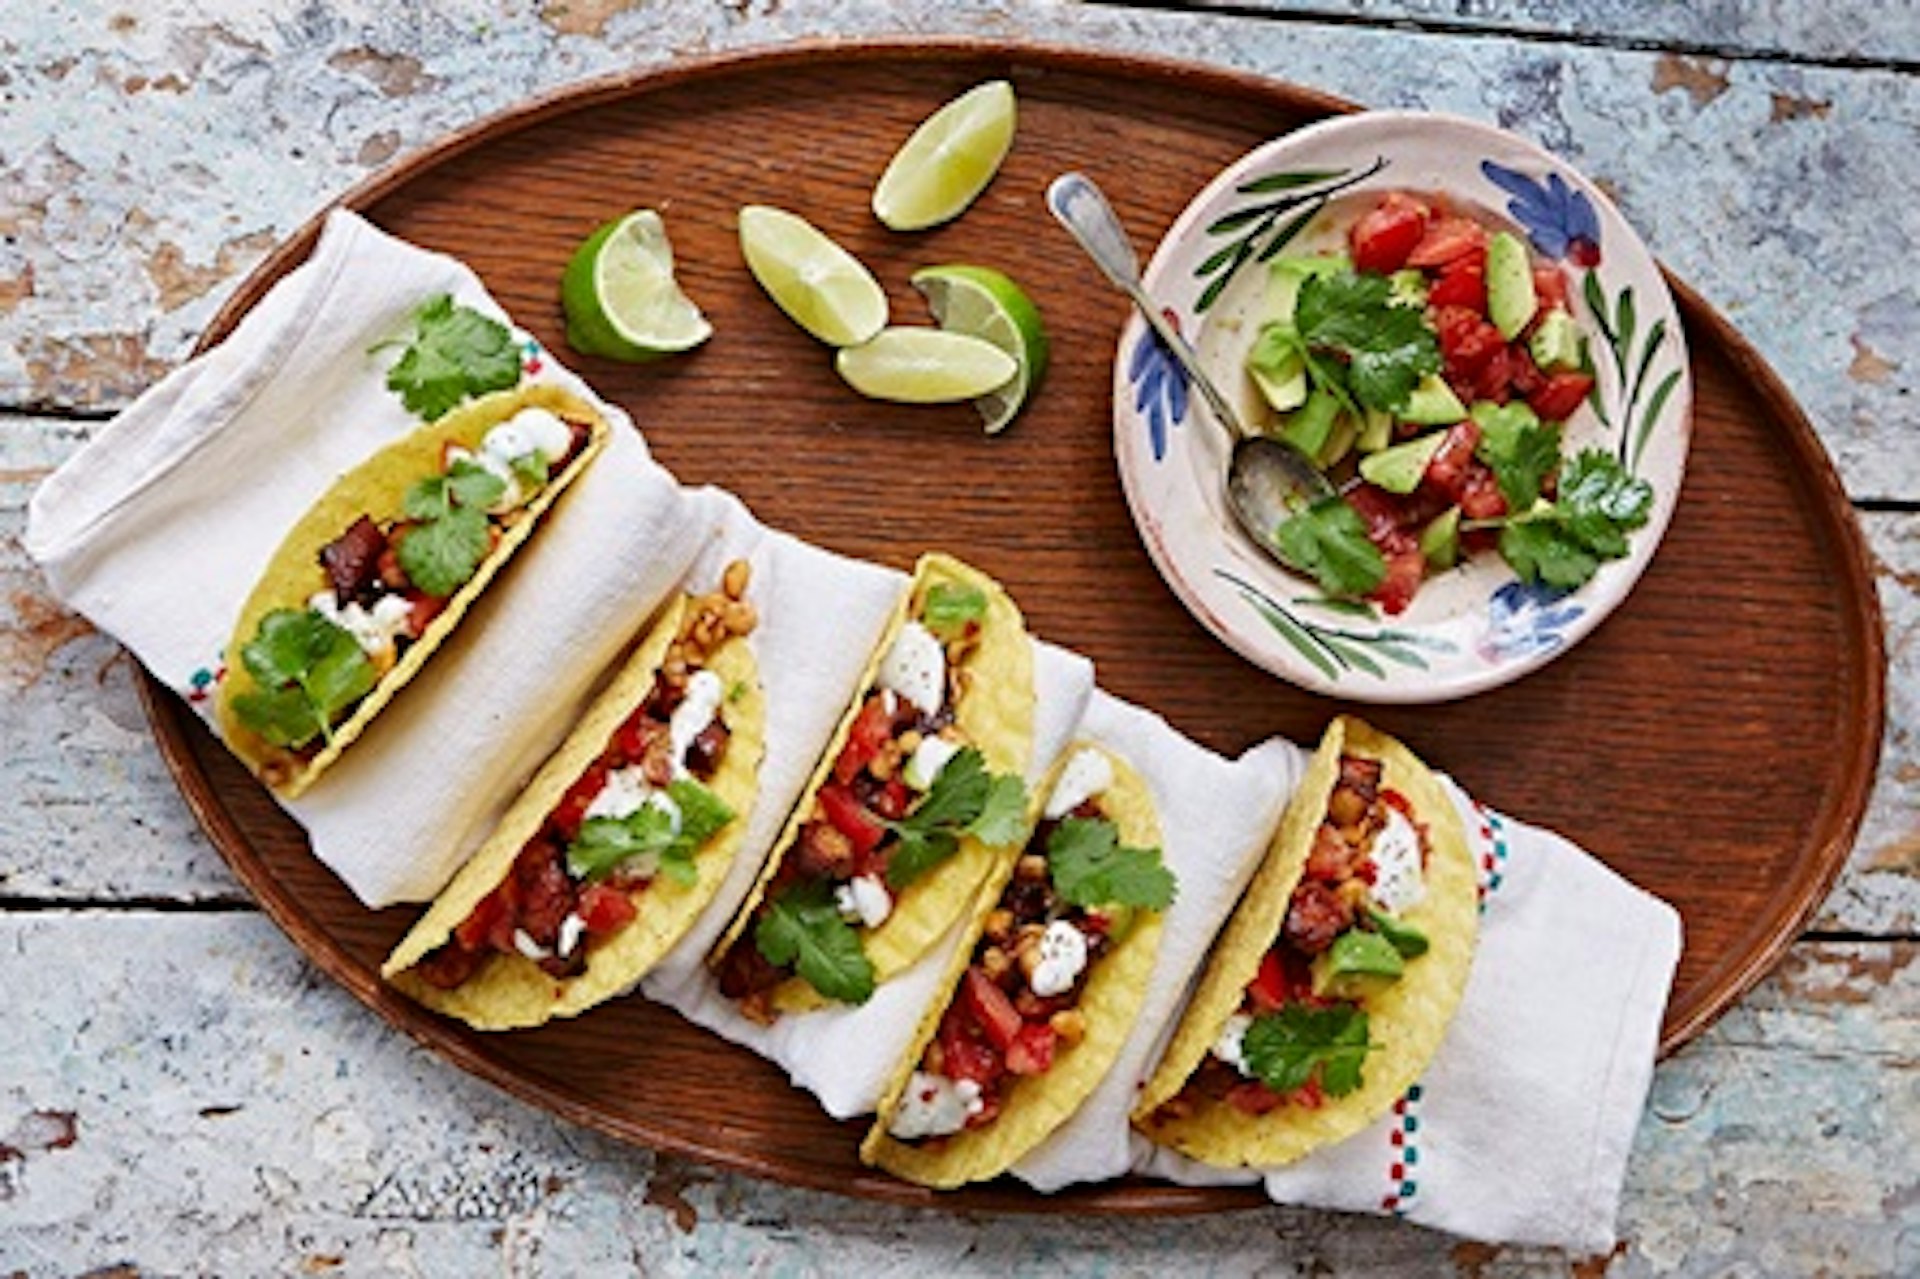 Mexican Street Food Class for Two at Jamie Oliver's Cookery School 2